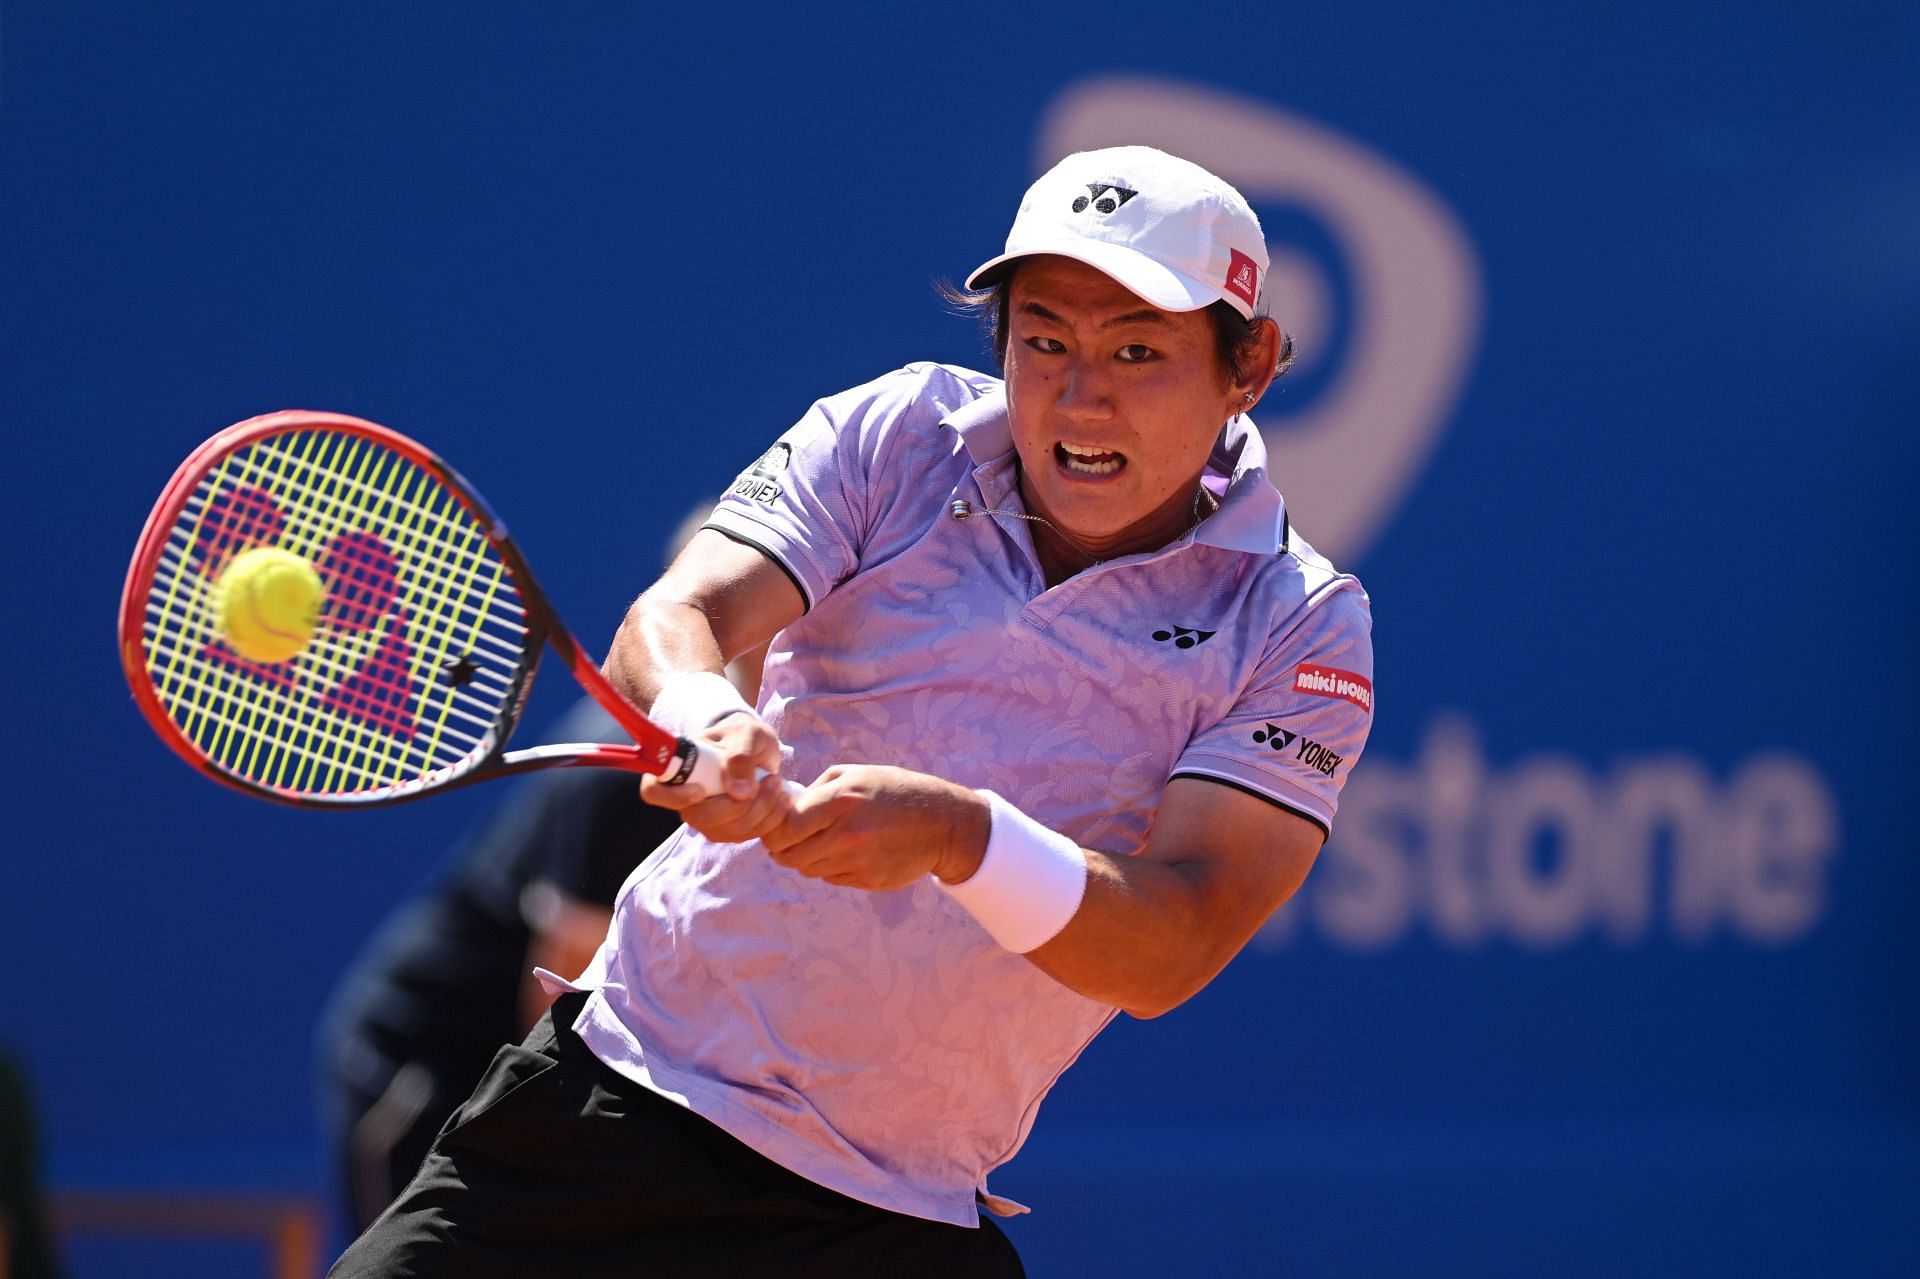 Nishioka beat Molcan in the second round